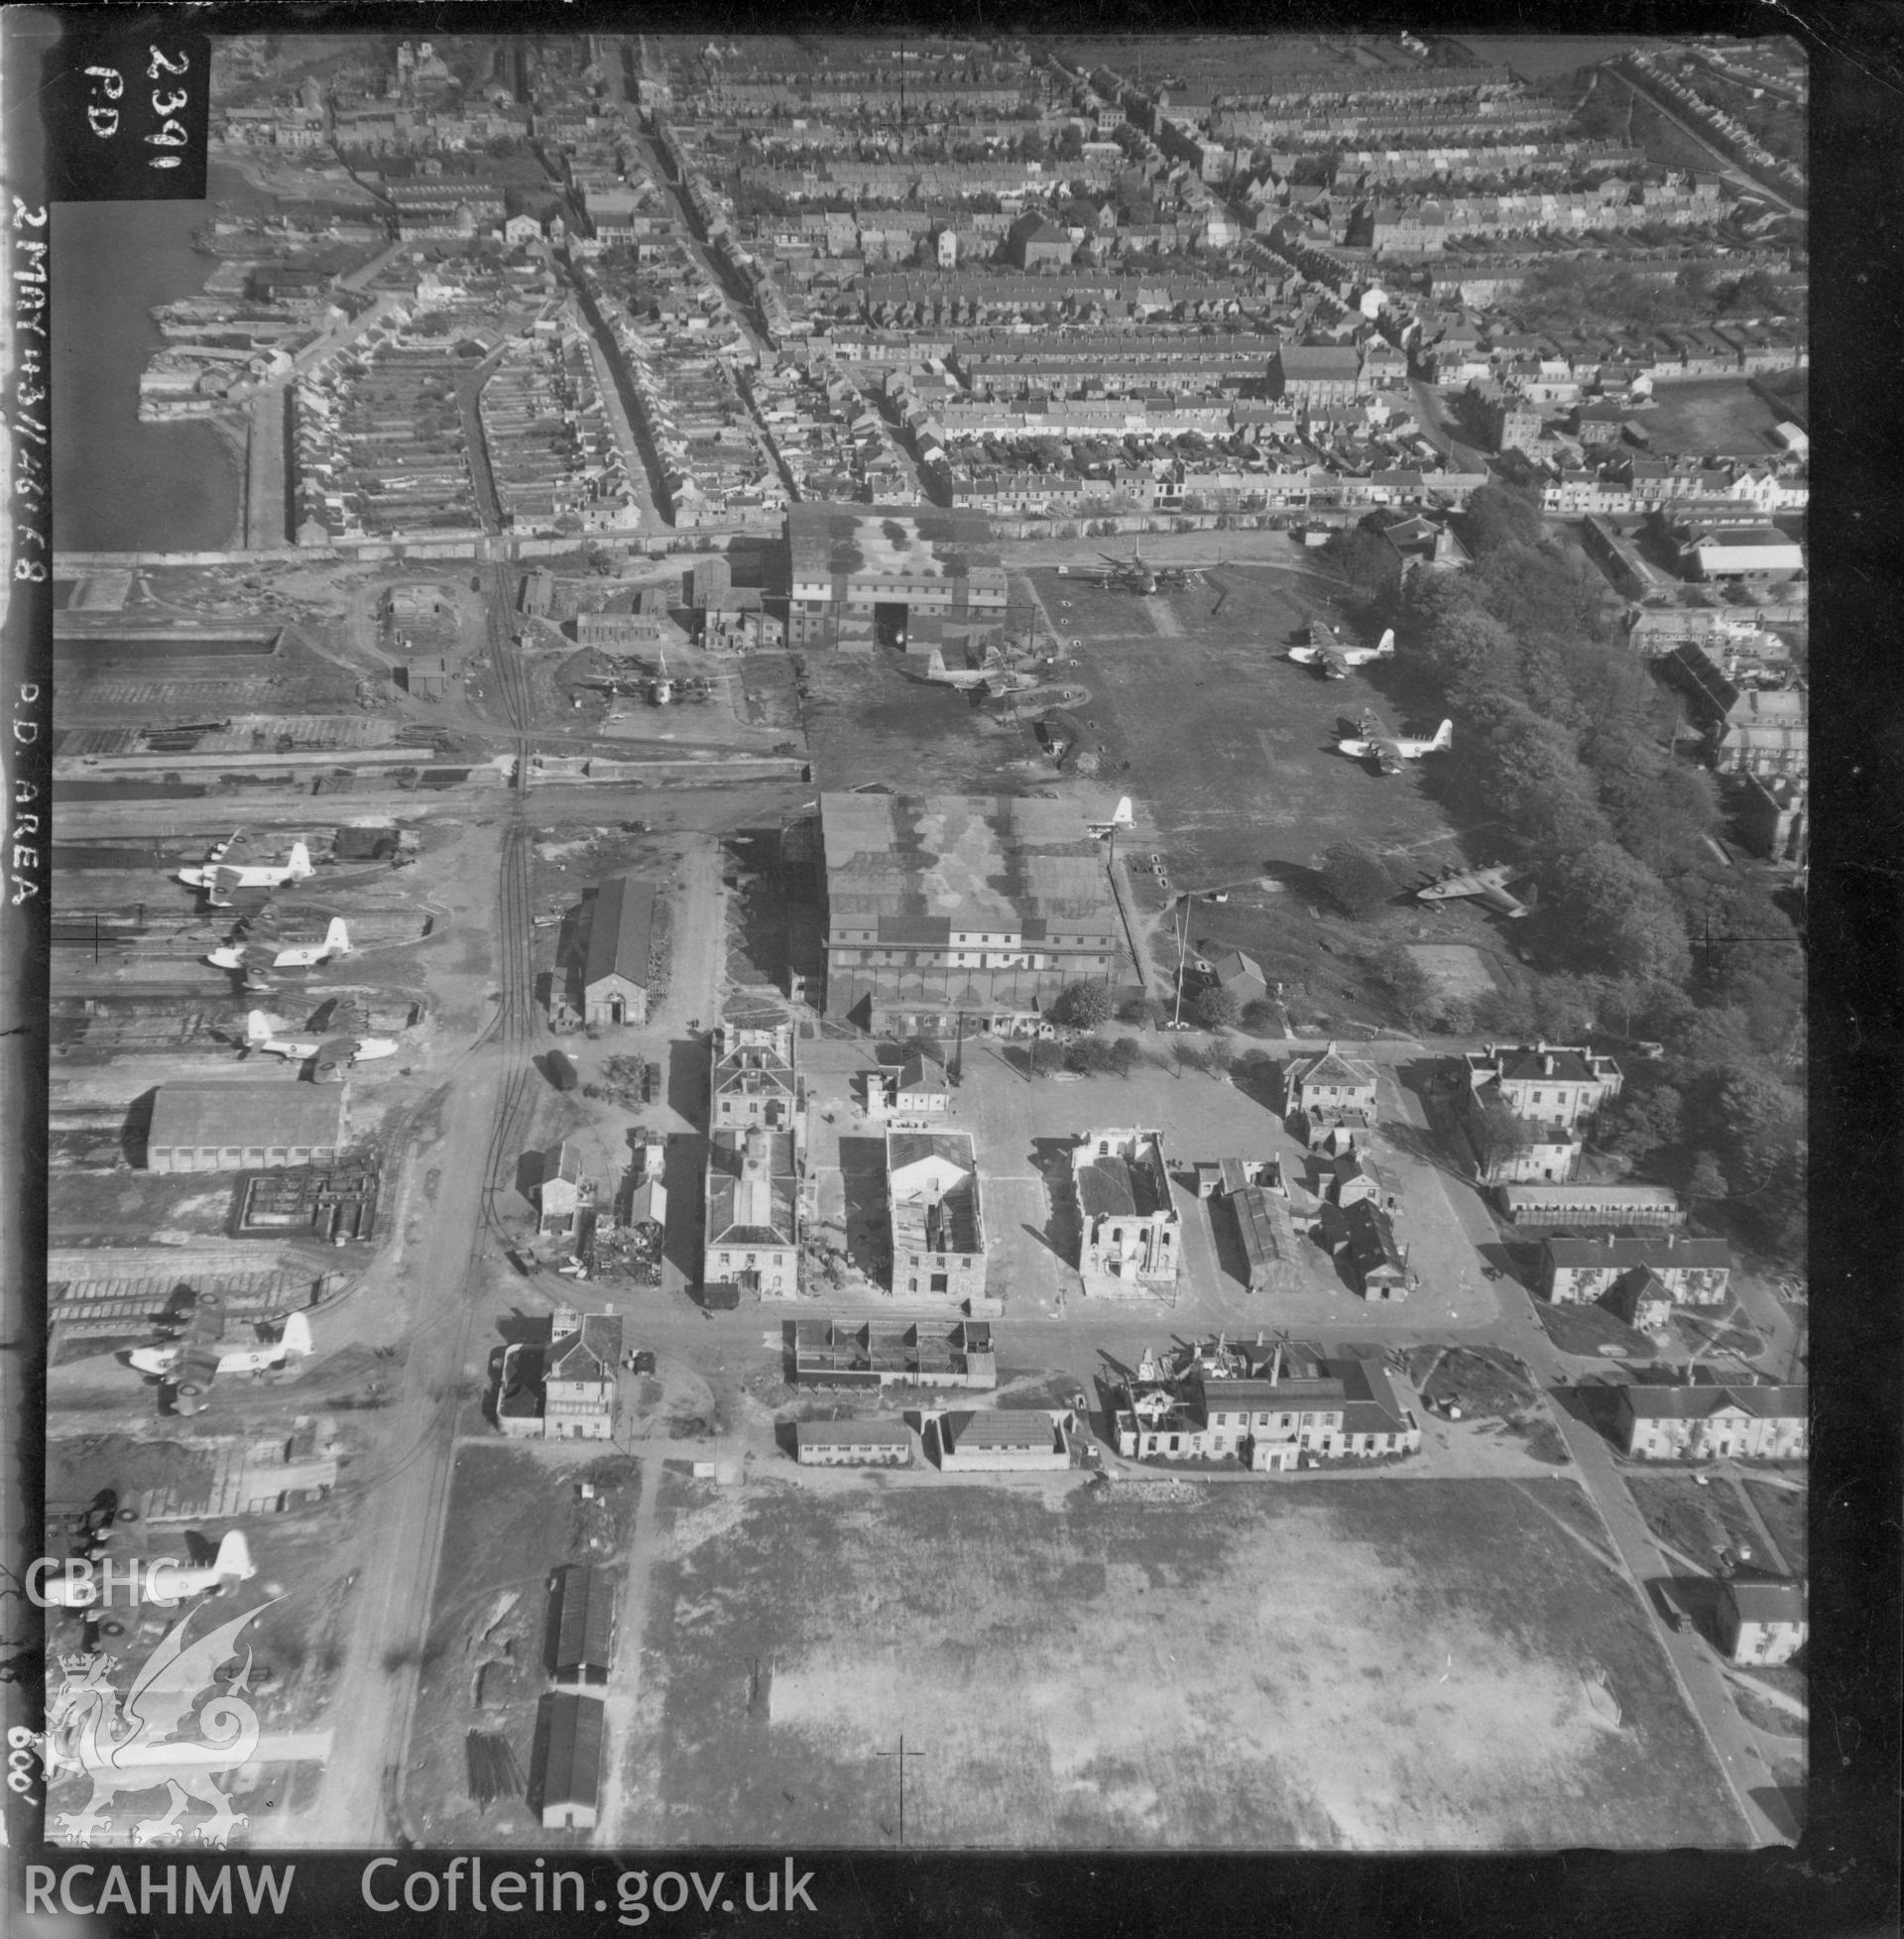 Aerial view of Pembroke Dock taken by the Royal Air Force, dated 2nd May 1943. Digitised from a print loaned for copying by David Green.